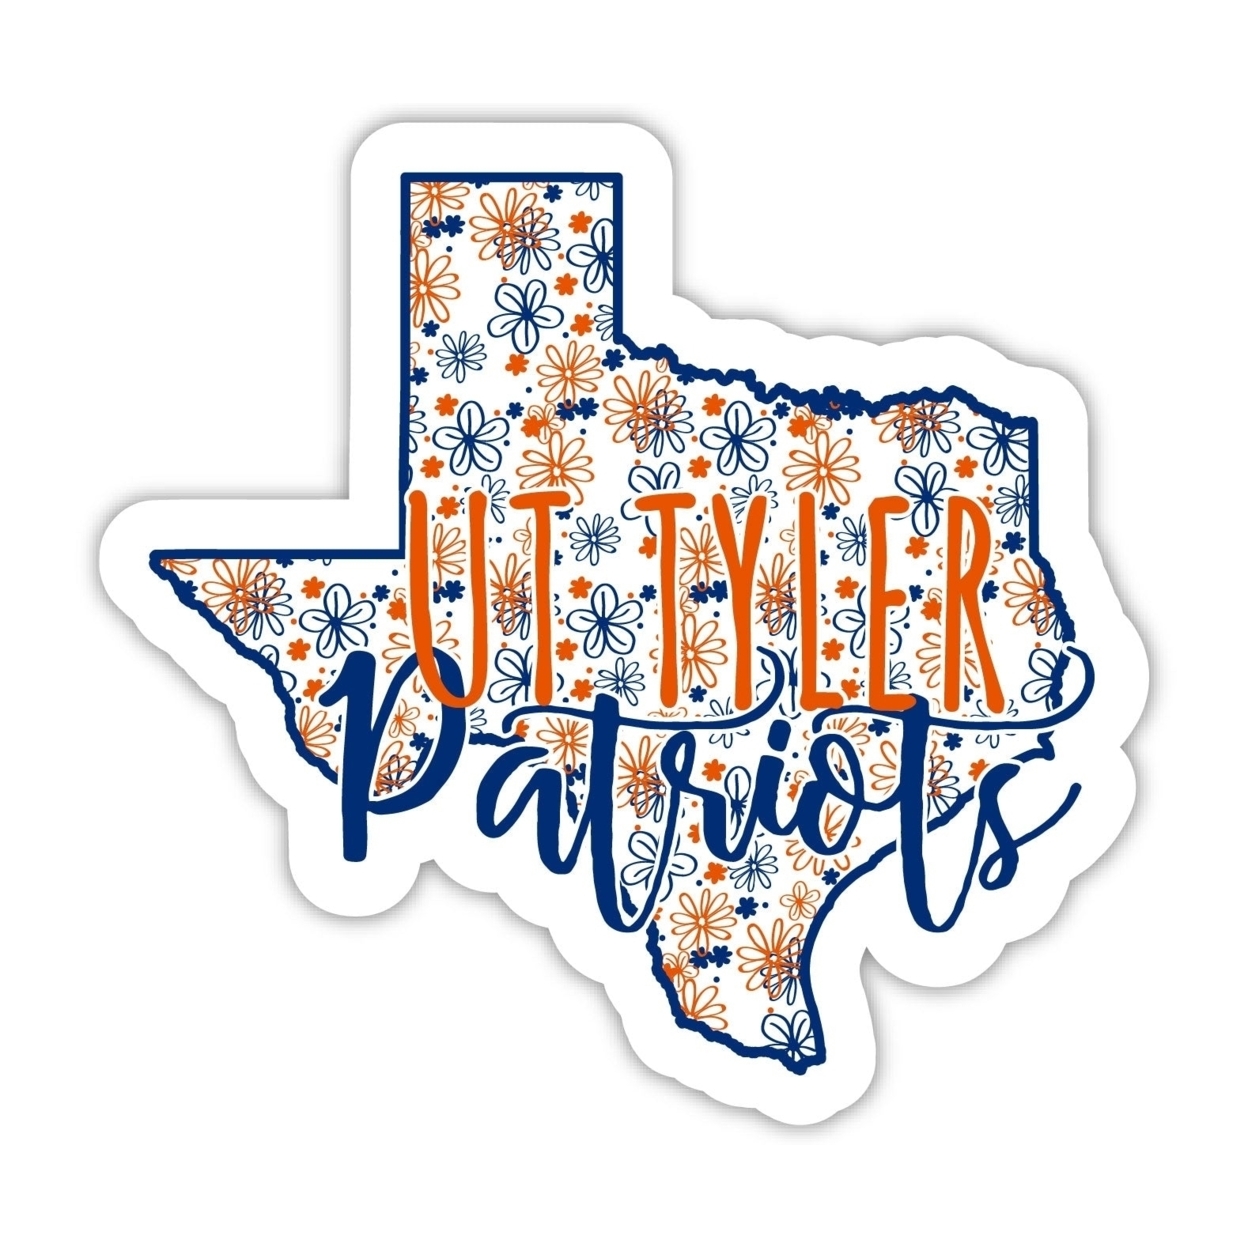 The University Of Texas At Tyler Floral State Die Cut Decal 2-Inch